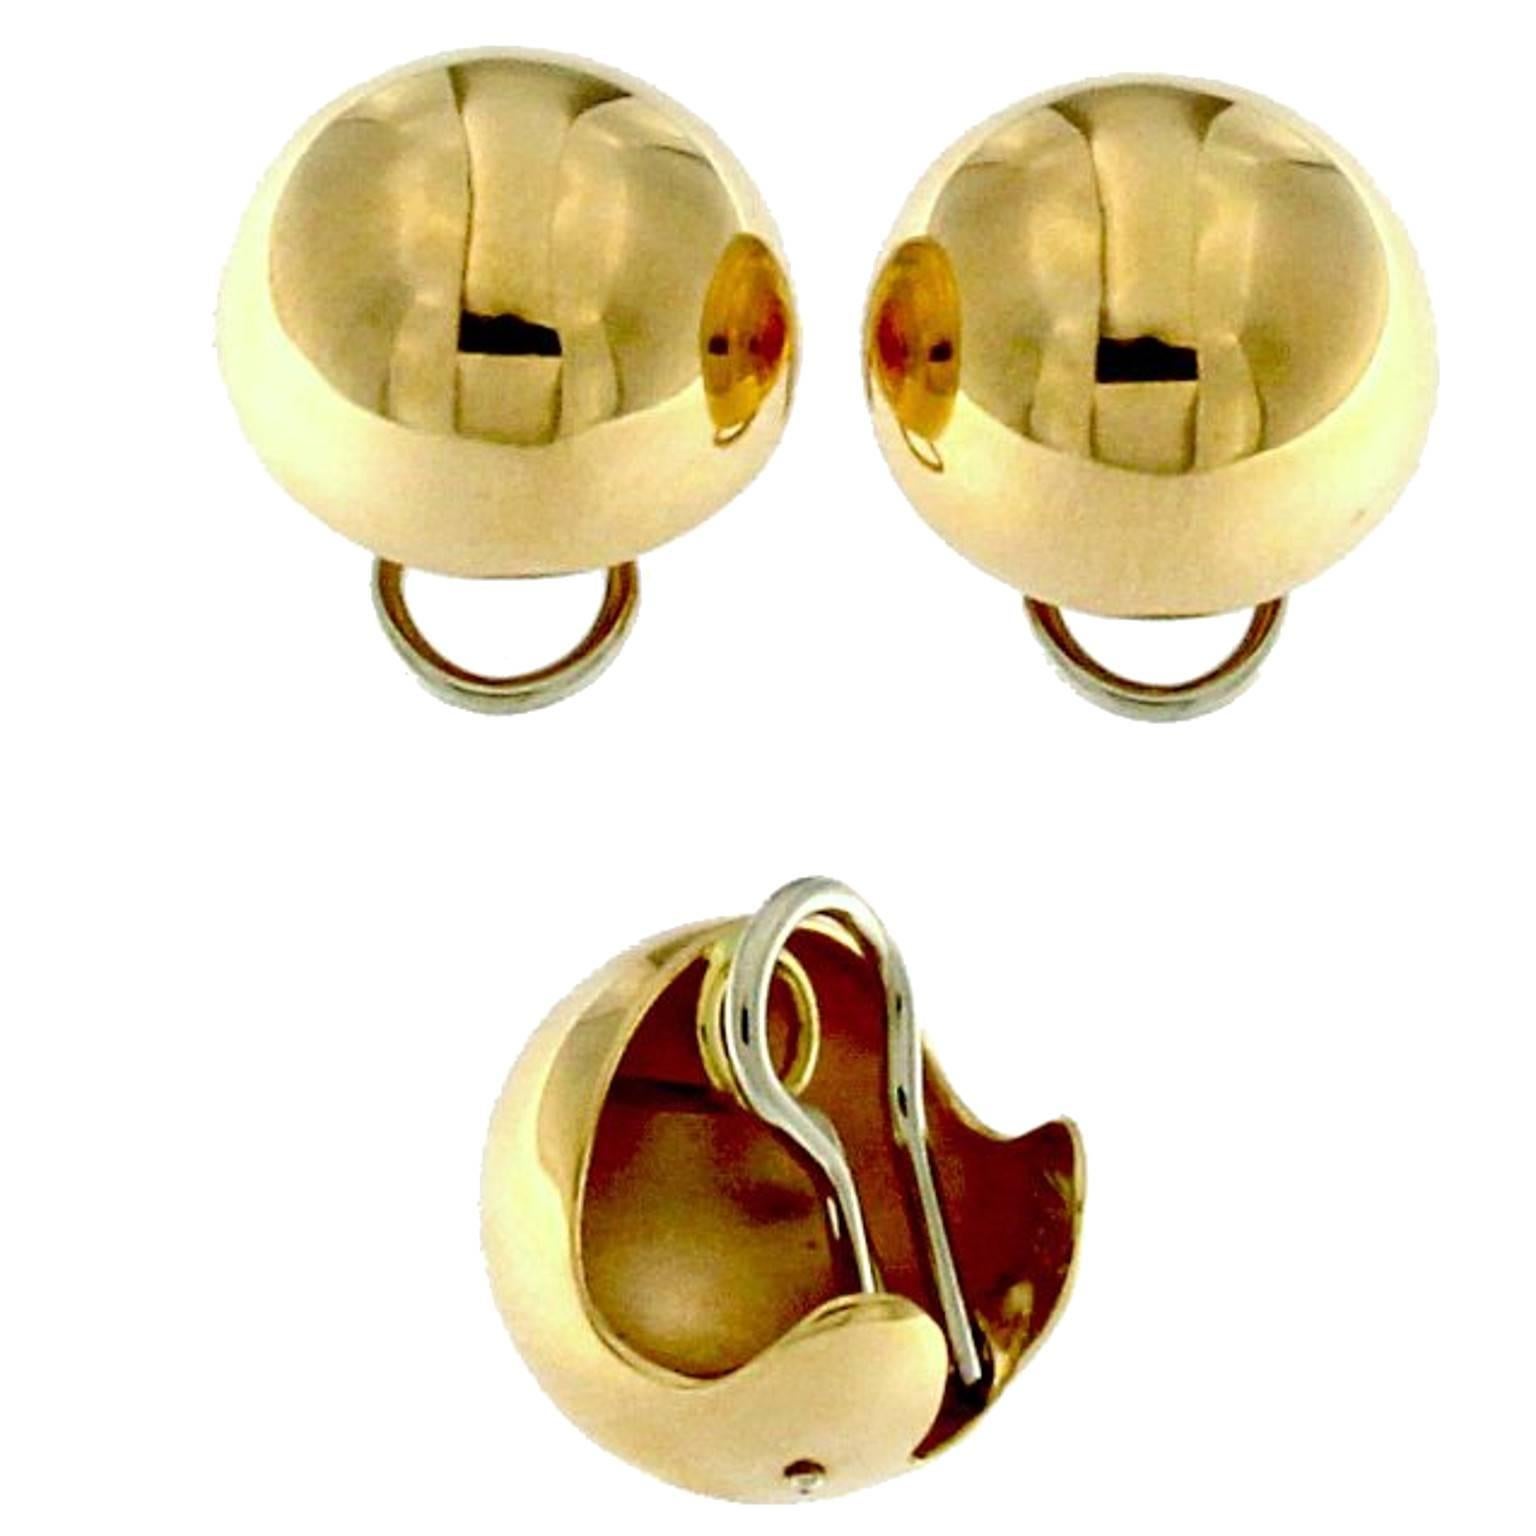 Pair of earrings in a simple botton design to be worn very classic style
Total weight of 18 kt gold: gr 14.40
